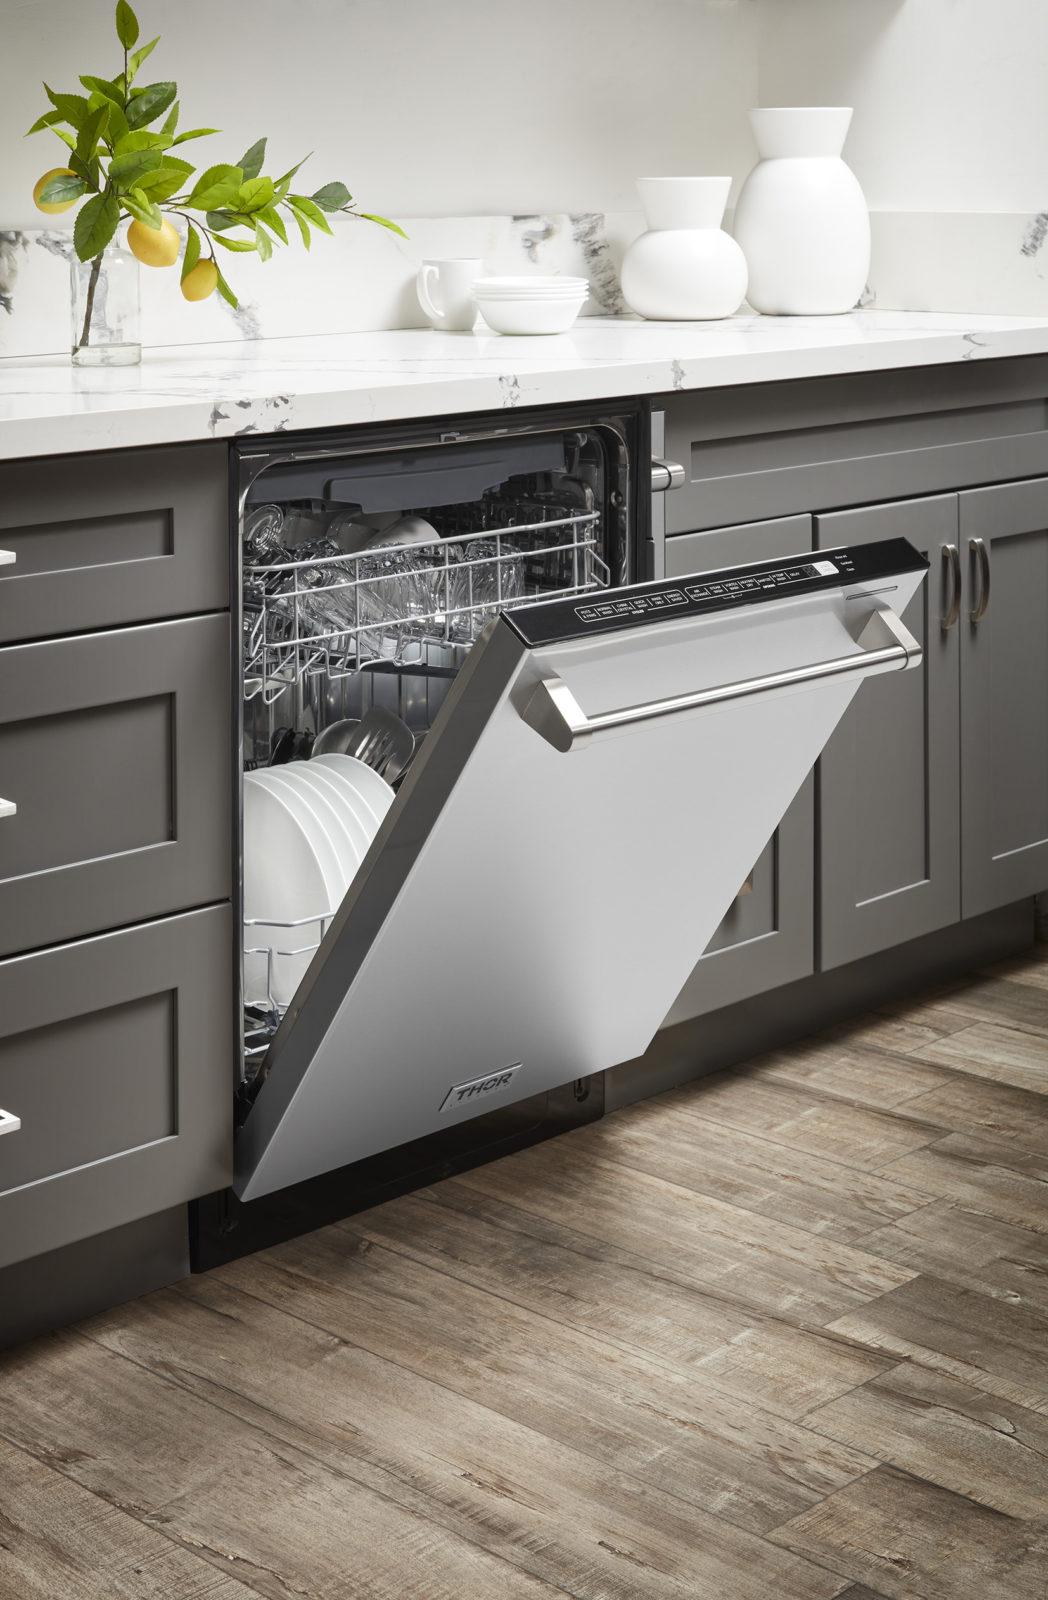 Thor Kitchen 24 Inch Built-in Dishwasher In Stainless Steel